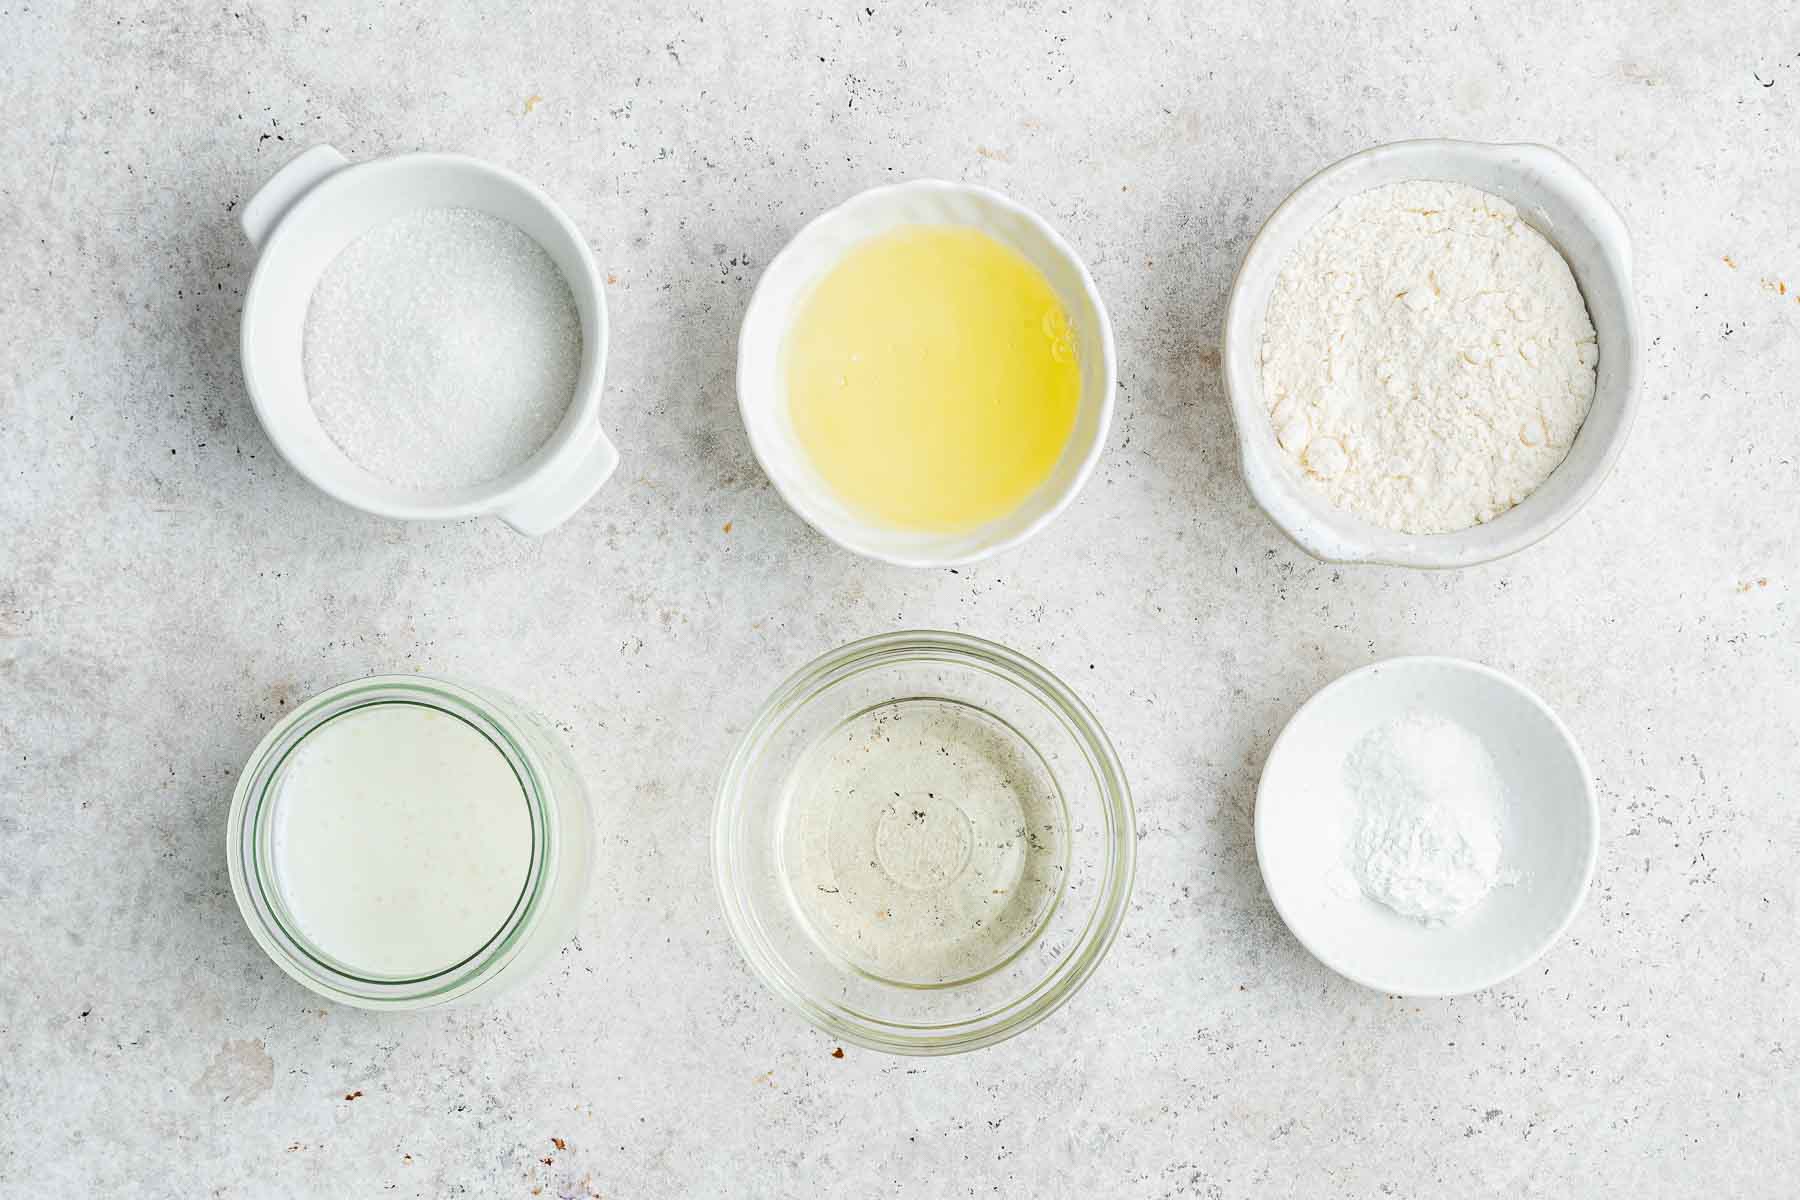 Small bowls with flour, egg white, buttermilk, and sugar on grey marble counter.